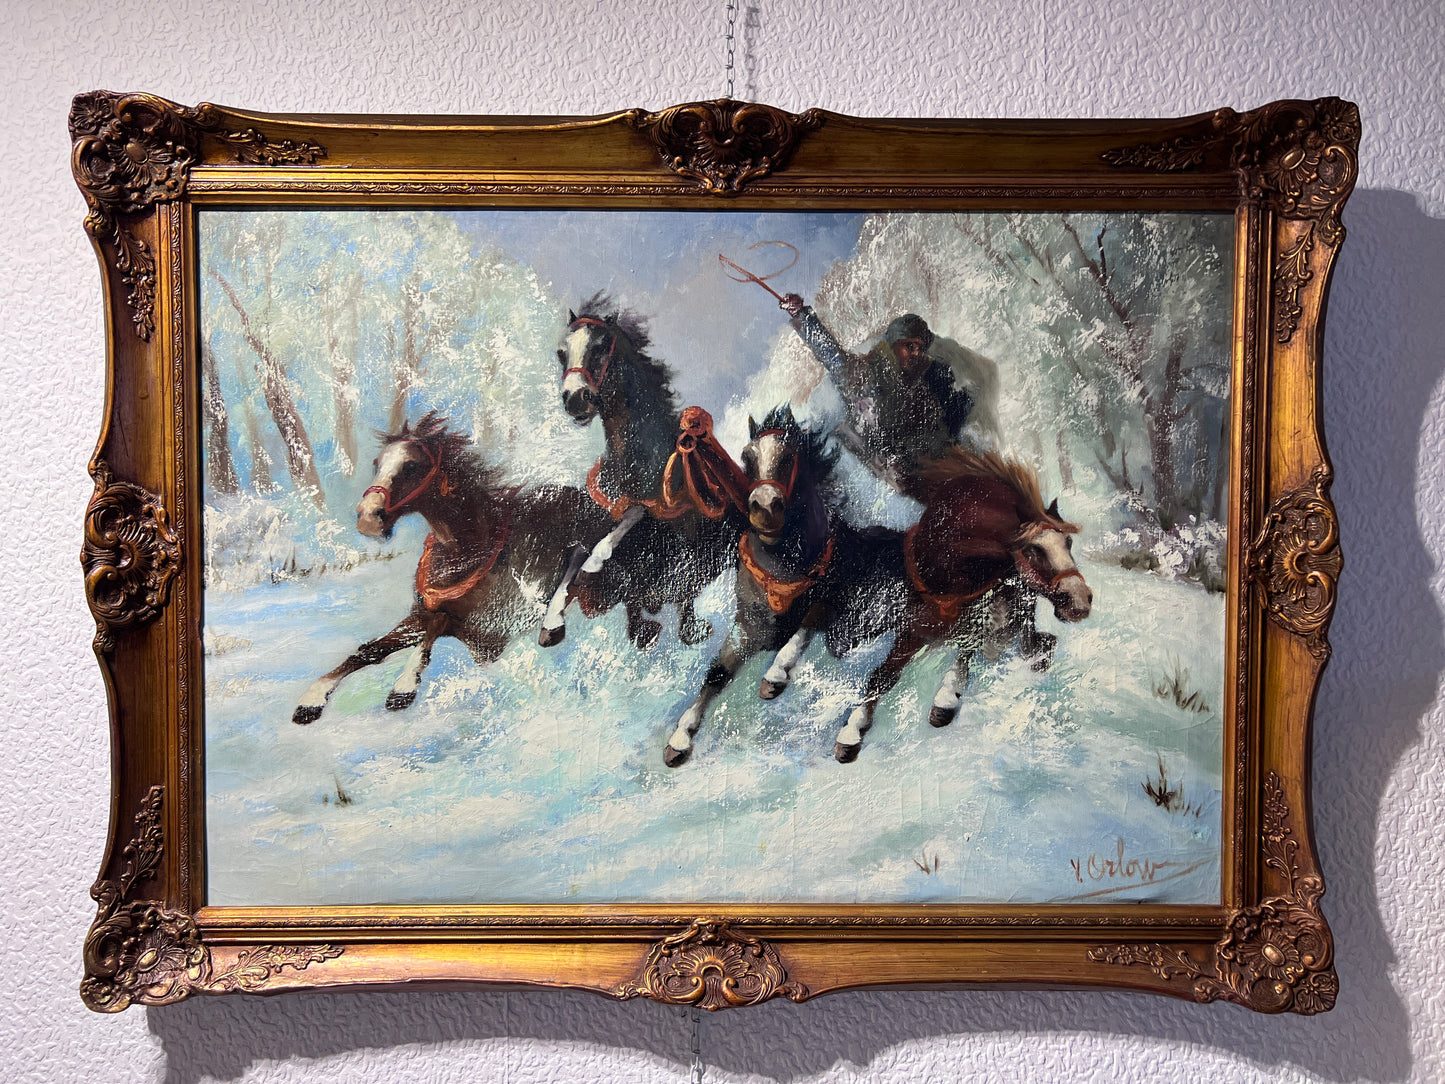 Victor Orlow (1911-?) Vintage Large Oil Painting on canvas, Horses, Framed